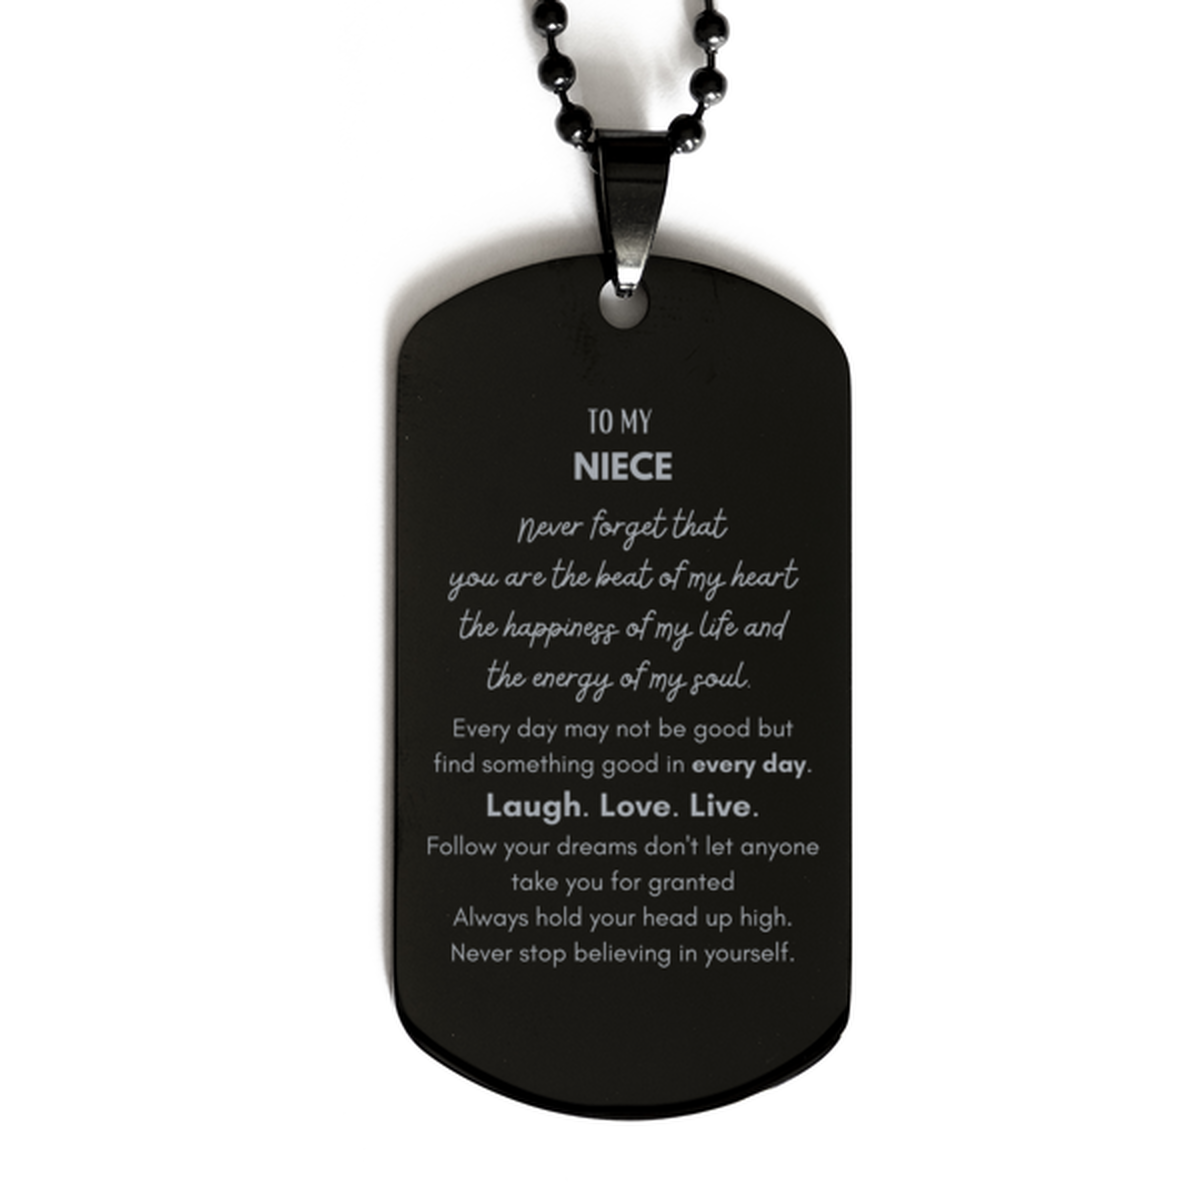 To My Niece Dogtag Gifts, Christmas Niece Black Dog Tag Present, Birthday Unique Motivational For Niece, To My Niece Never forget that you are the beat of my heart the happiness of my life and the energy of my soul